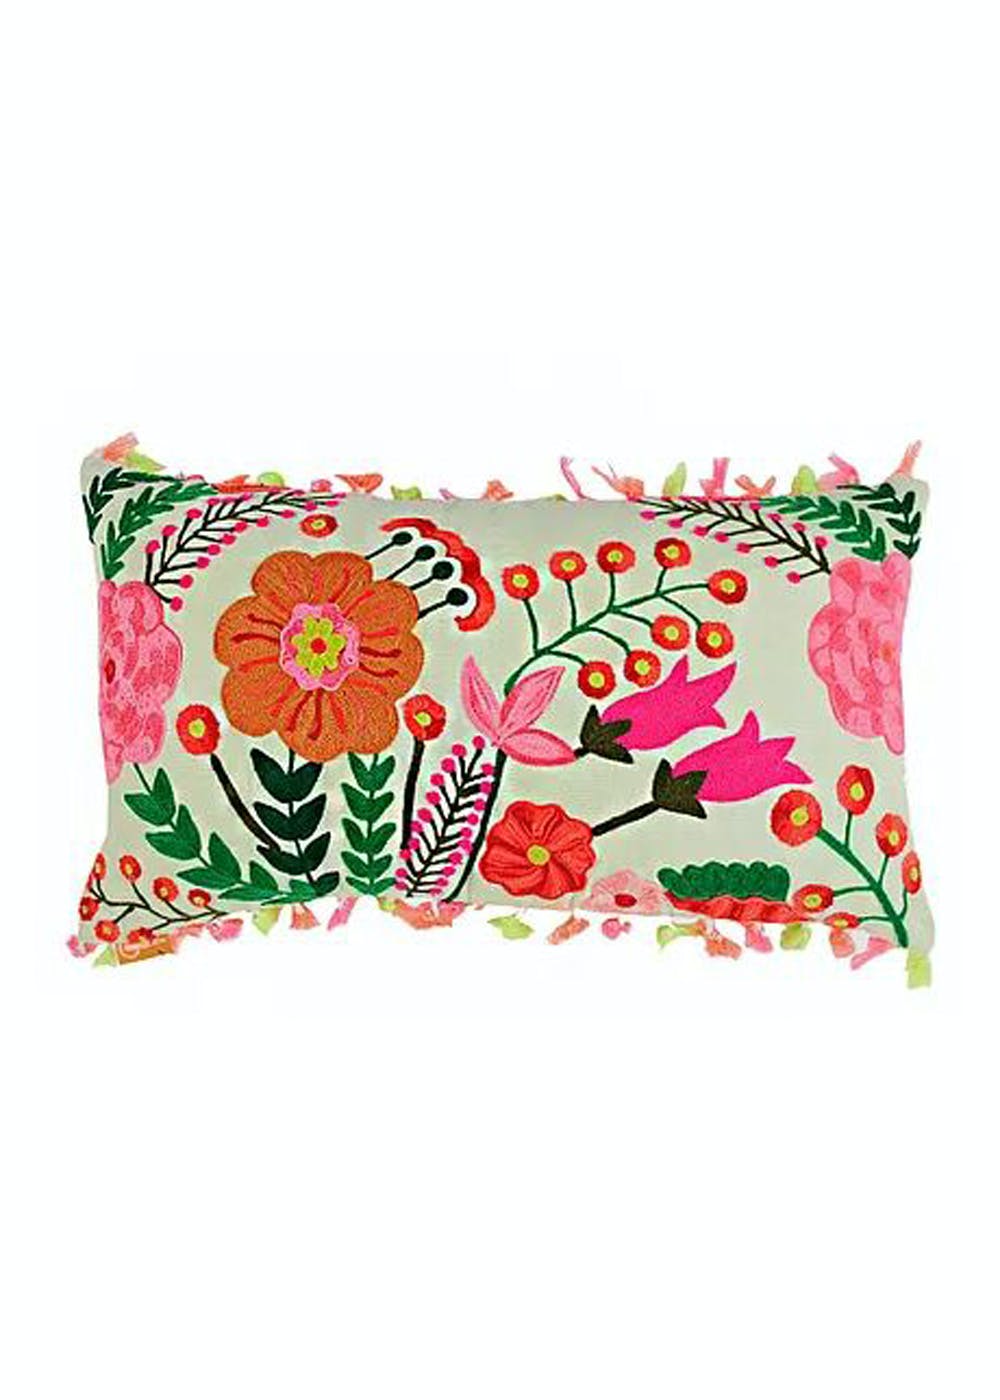 Floral Green Crewel-Embroidered Cotton Cushion Cover